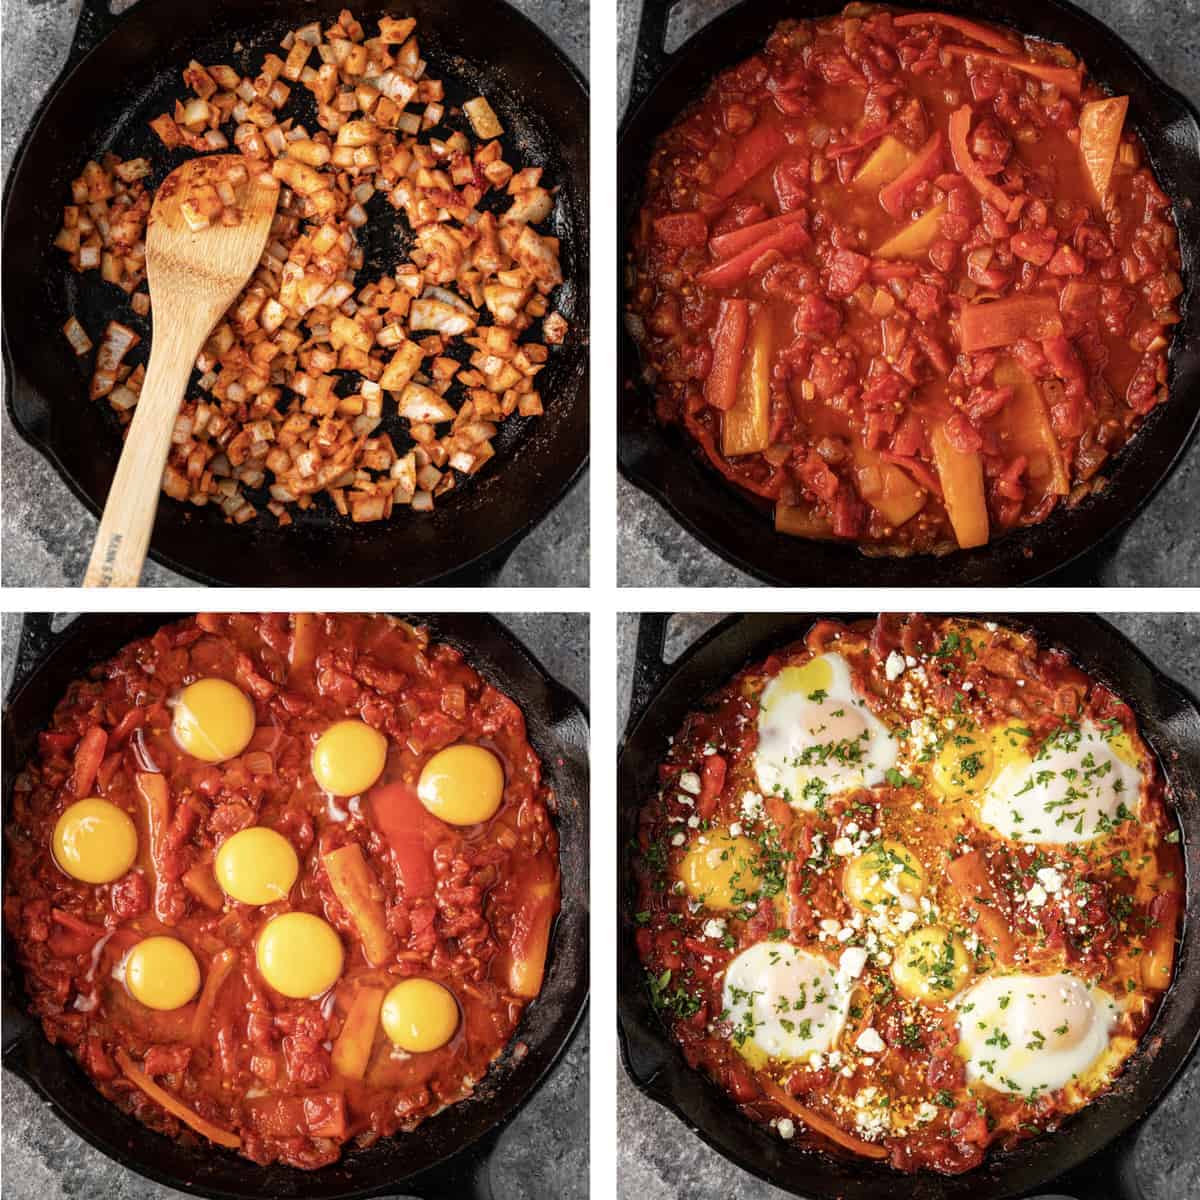 4-photo collage shows process of making shakshuka in tomato sauce